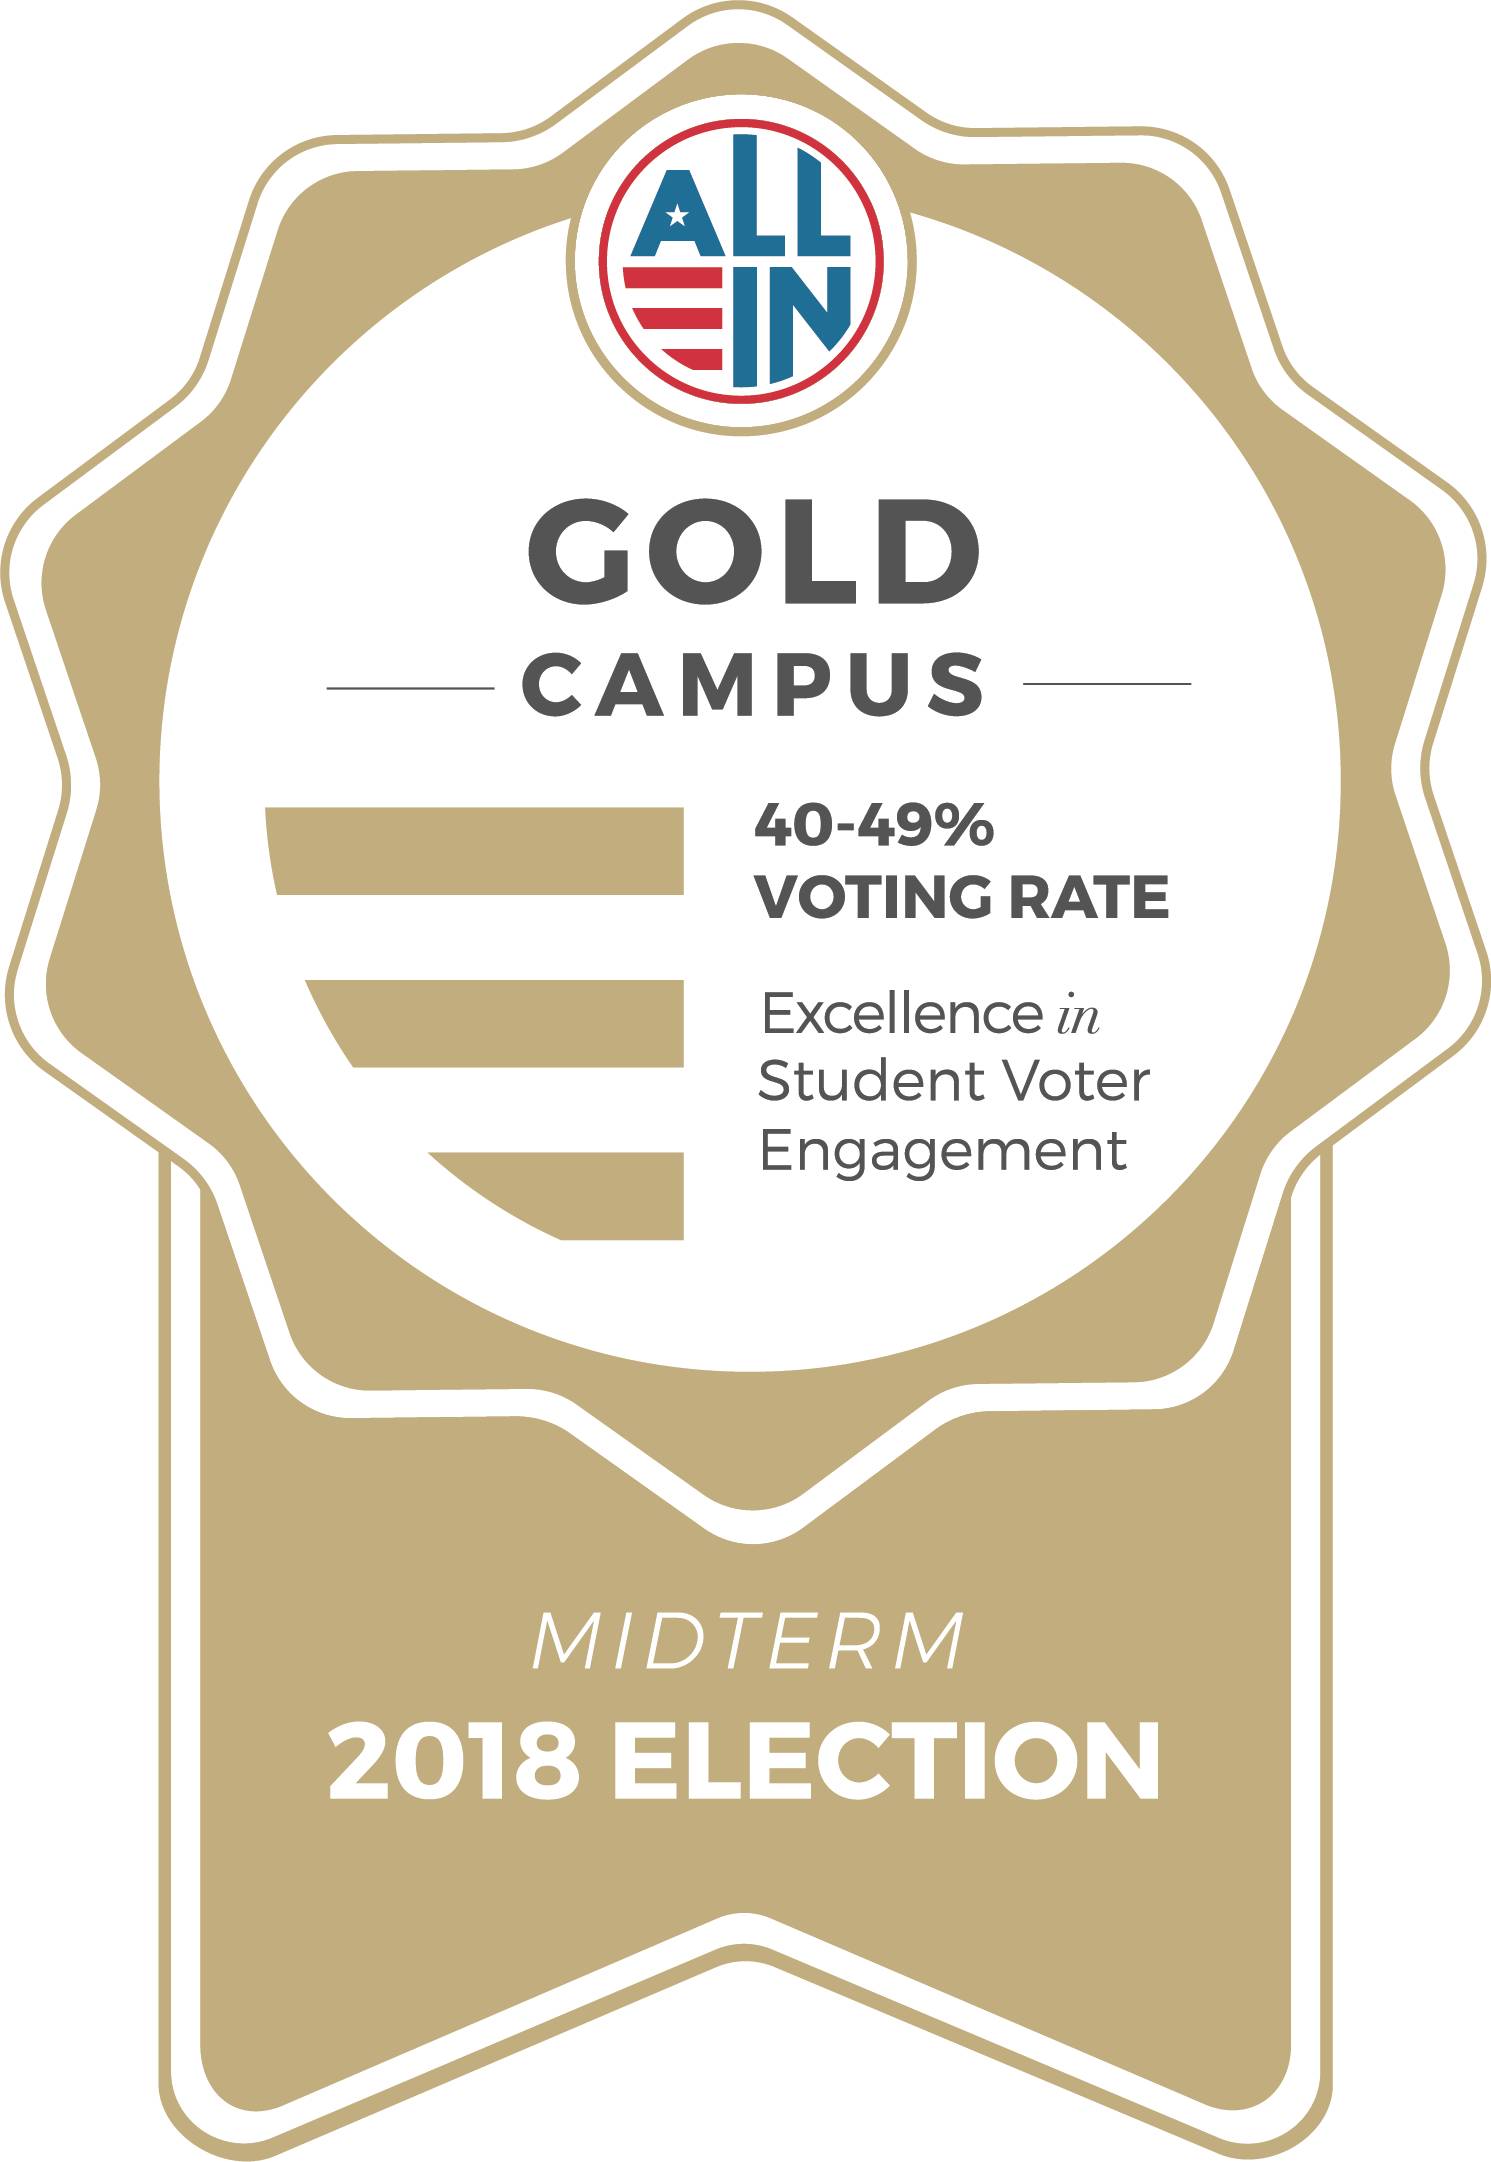 2018 Midterm Election "Gold Campus" for Excellence in Student Voter Engagement